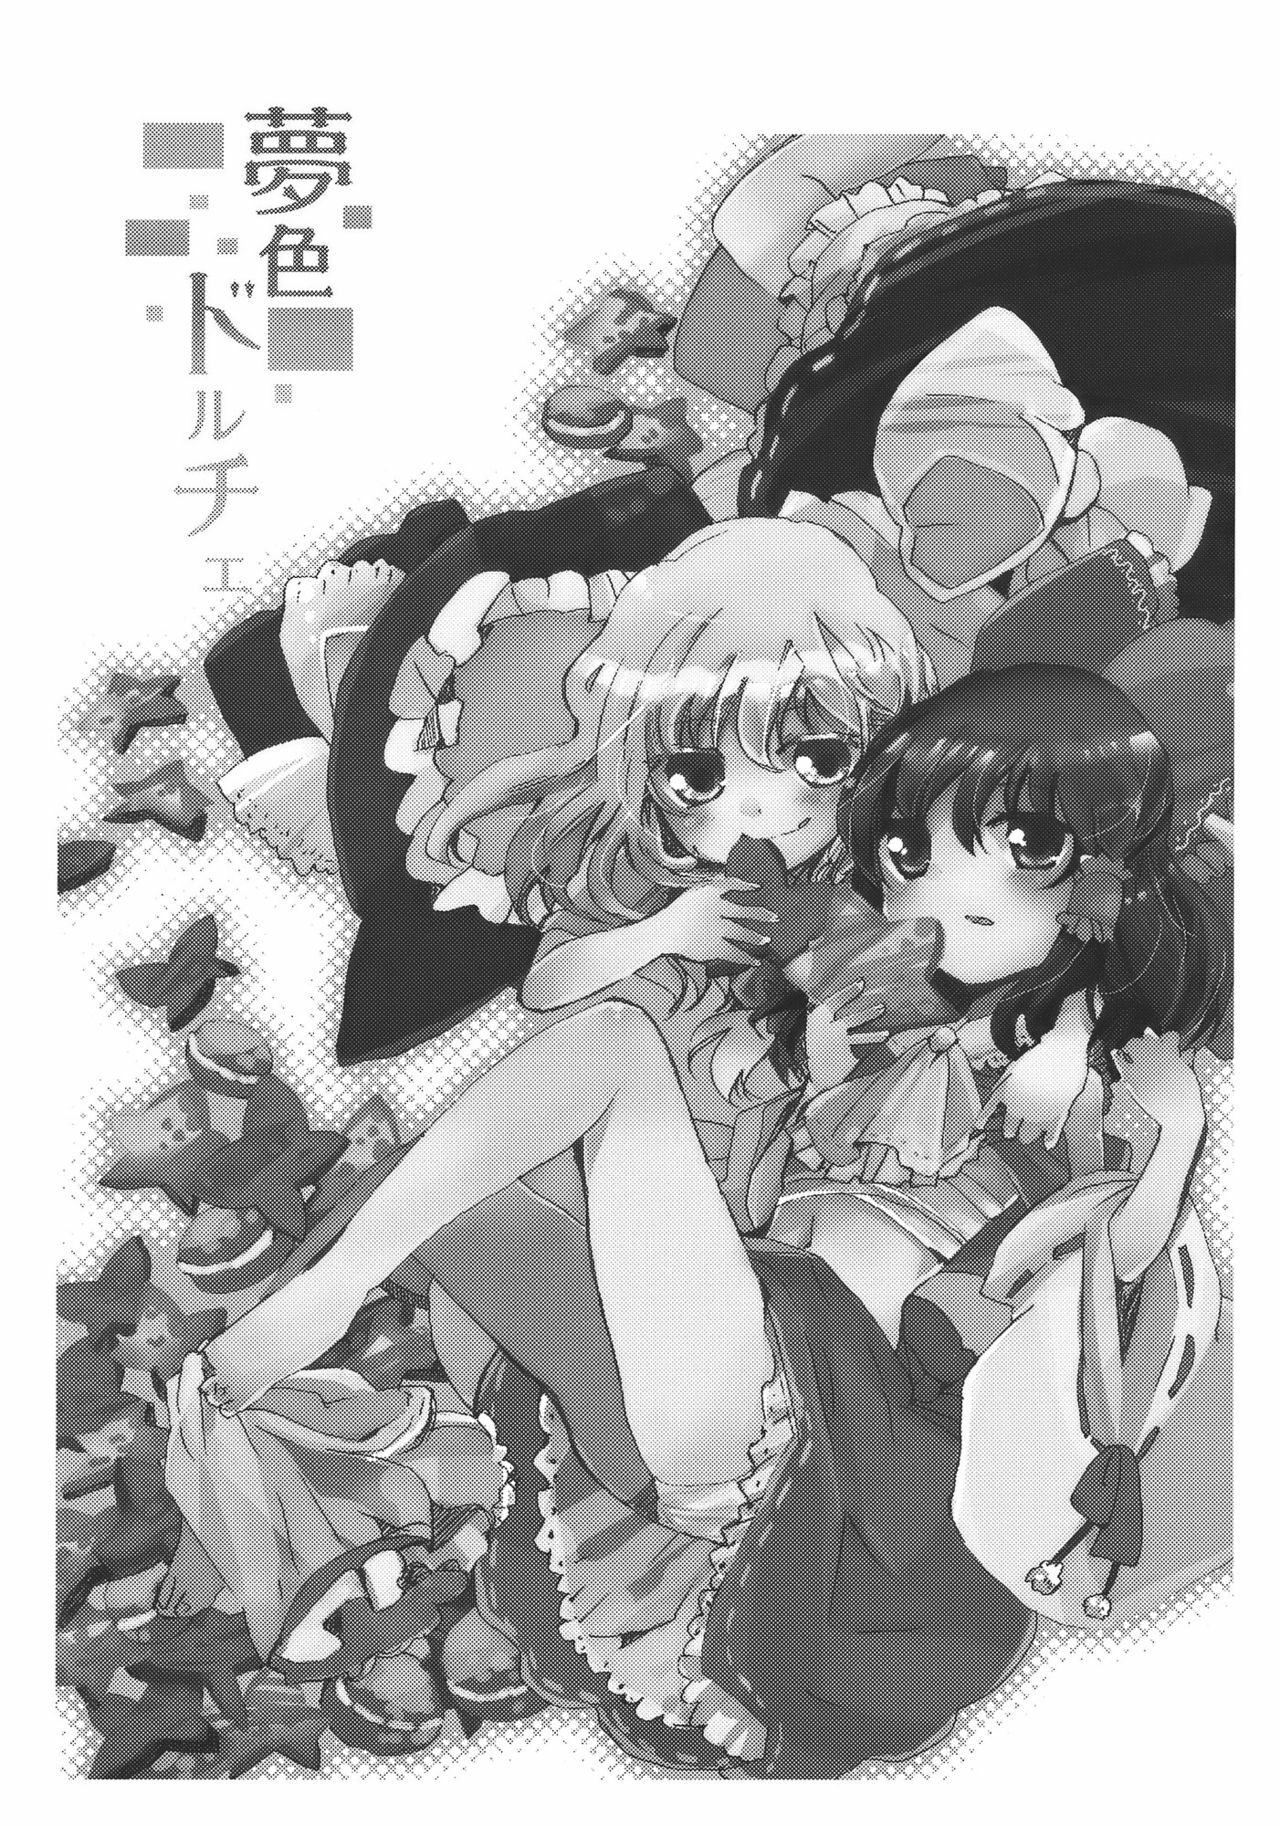 [Oimoto] Yumeiro Dolce (Touhou Project) page 3 full